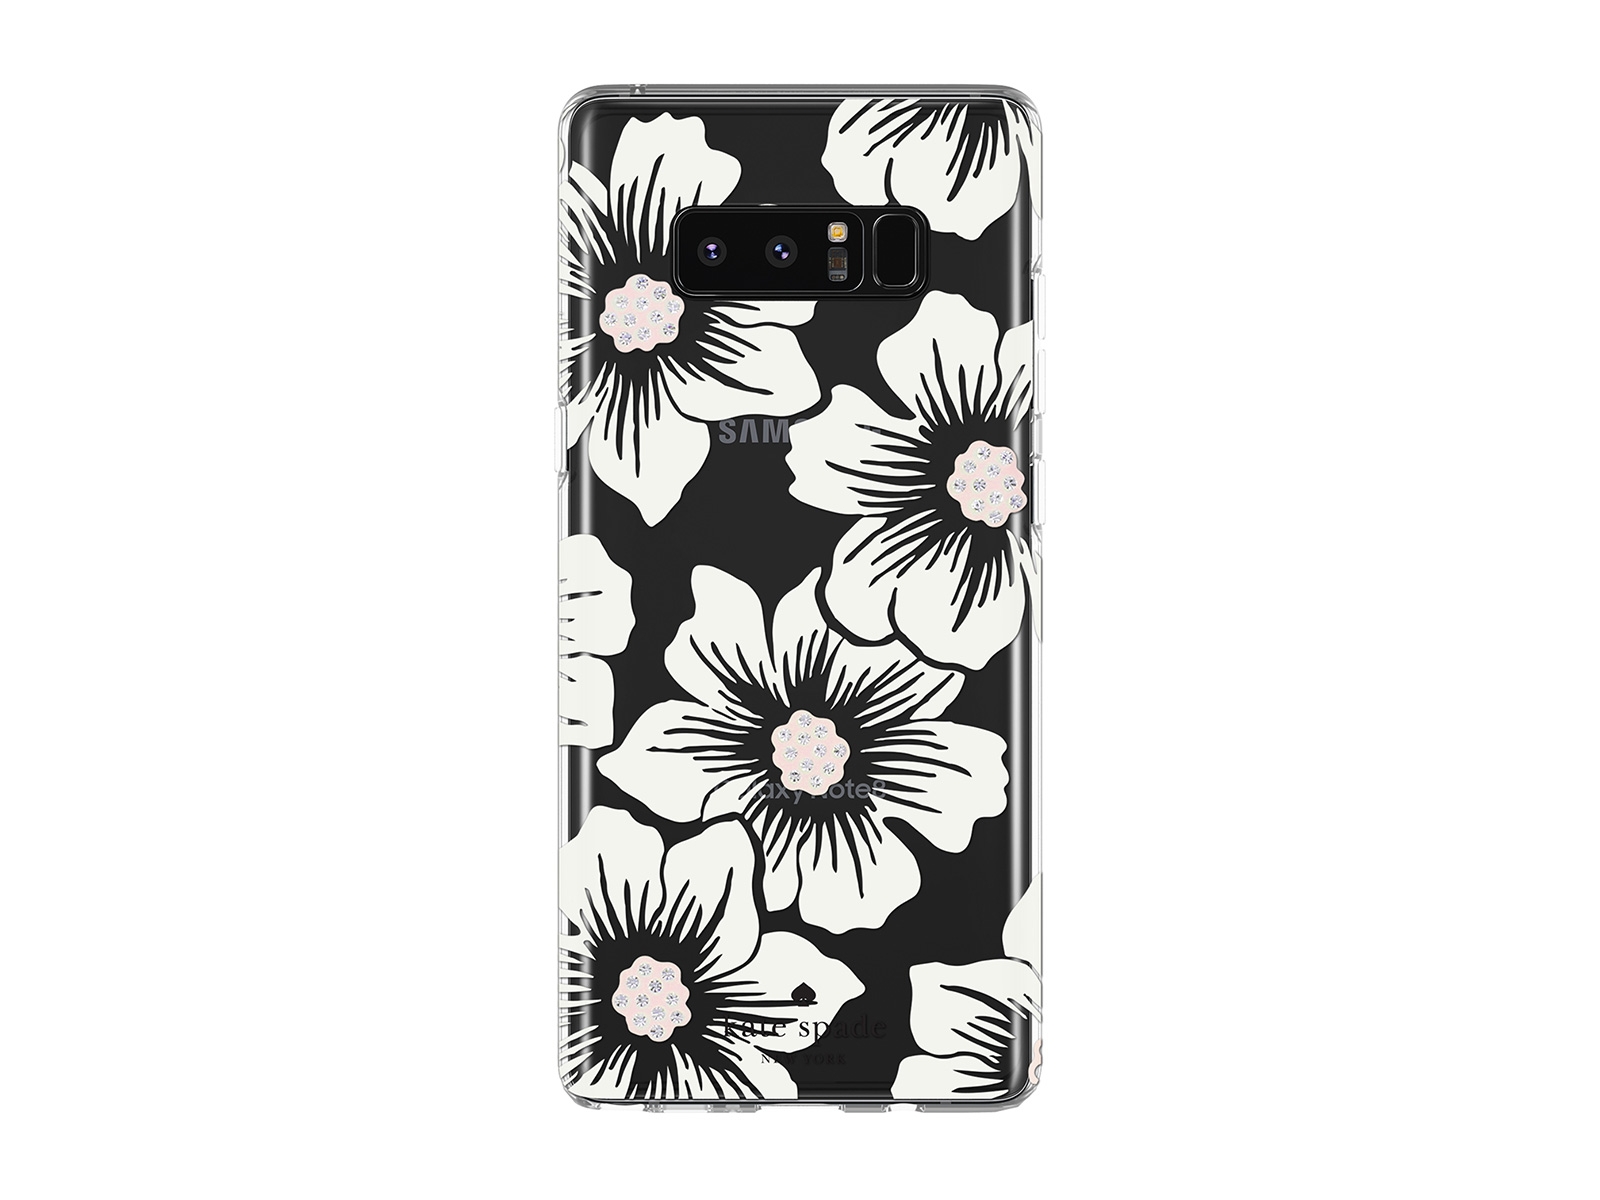 Thumbnail image of kate spade Flexible Hardshell Case for Note8, Hollyhock Floral